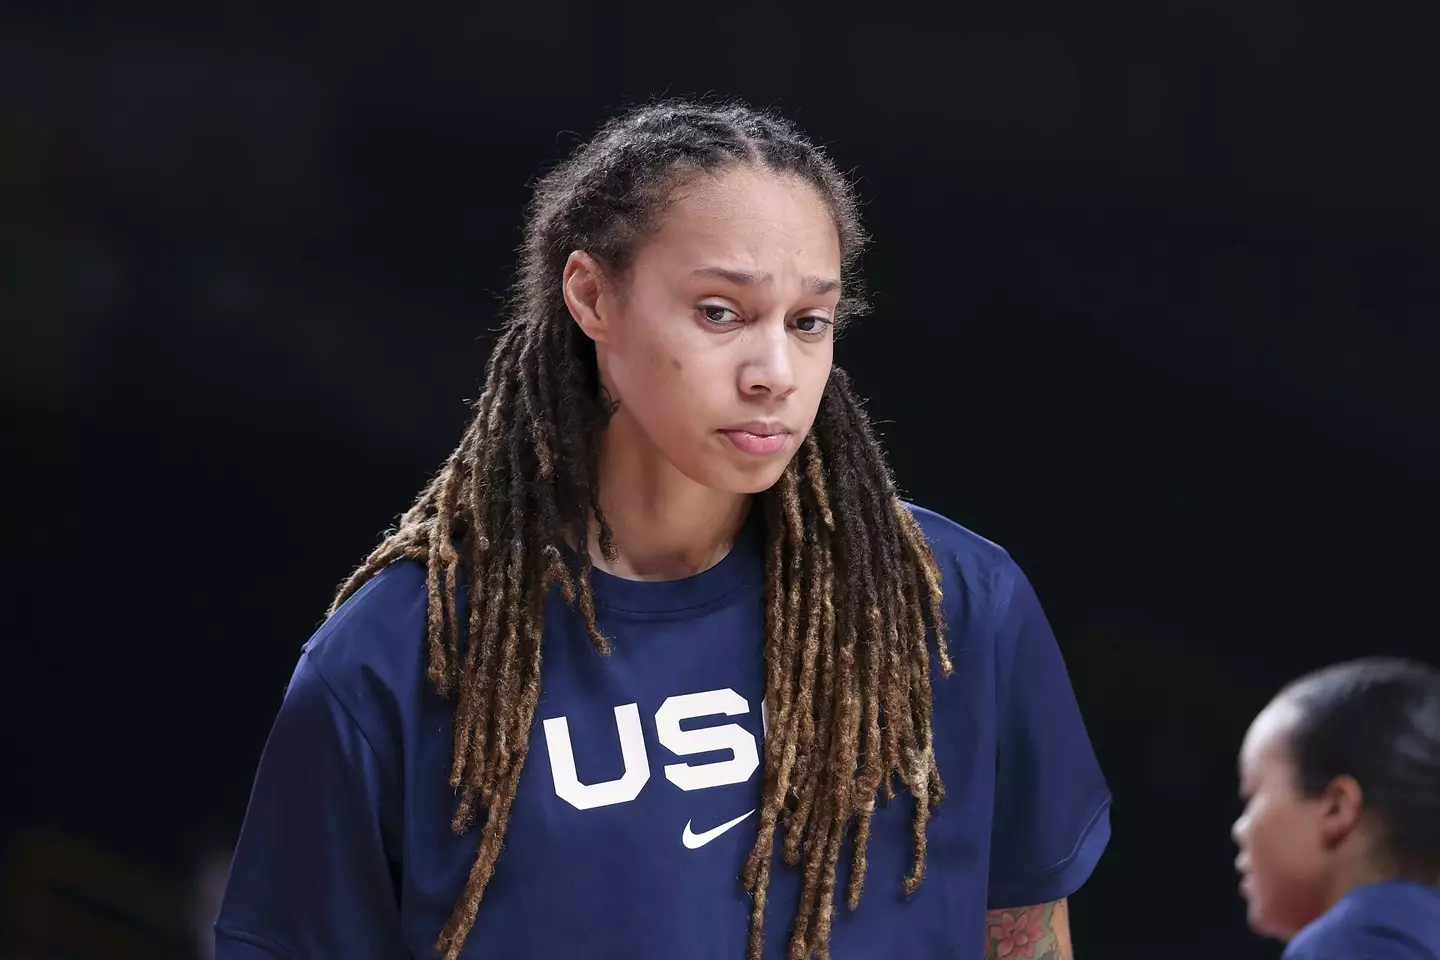 Prosecutors asked that Griner be sentenced to 9.5 years in prison.